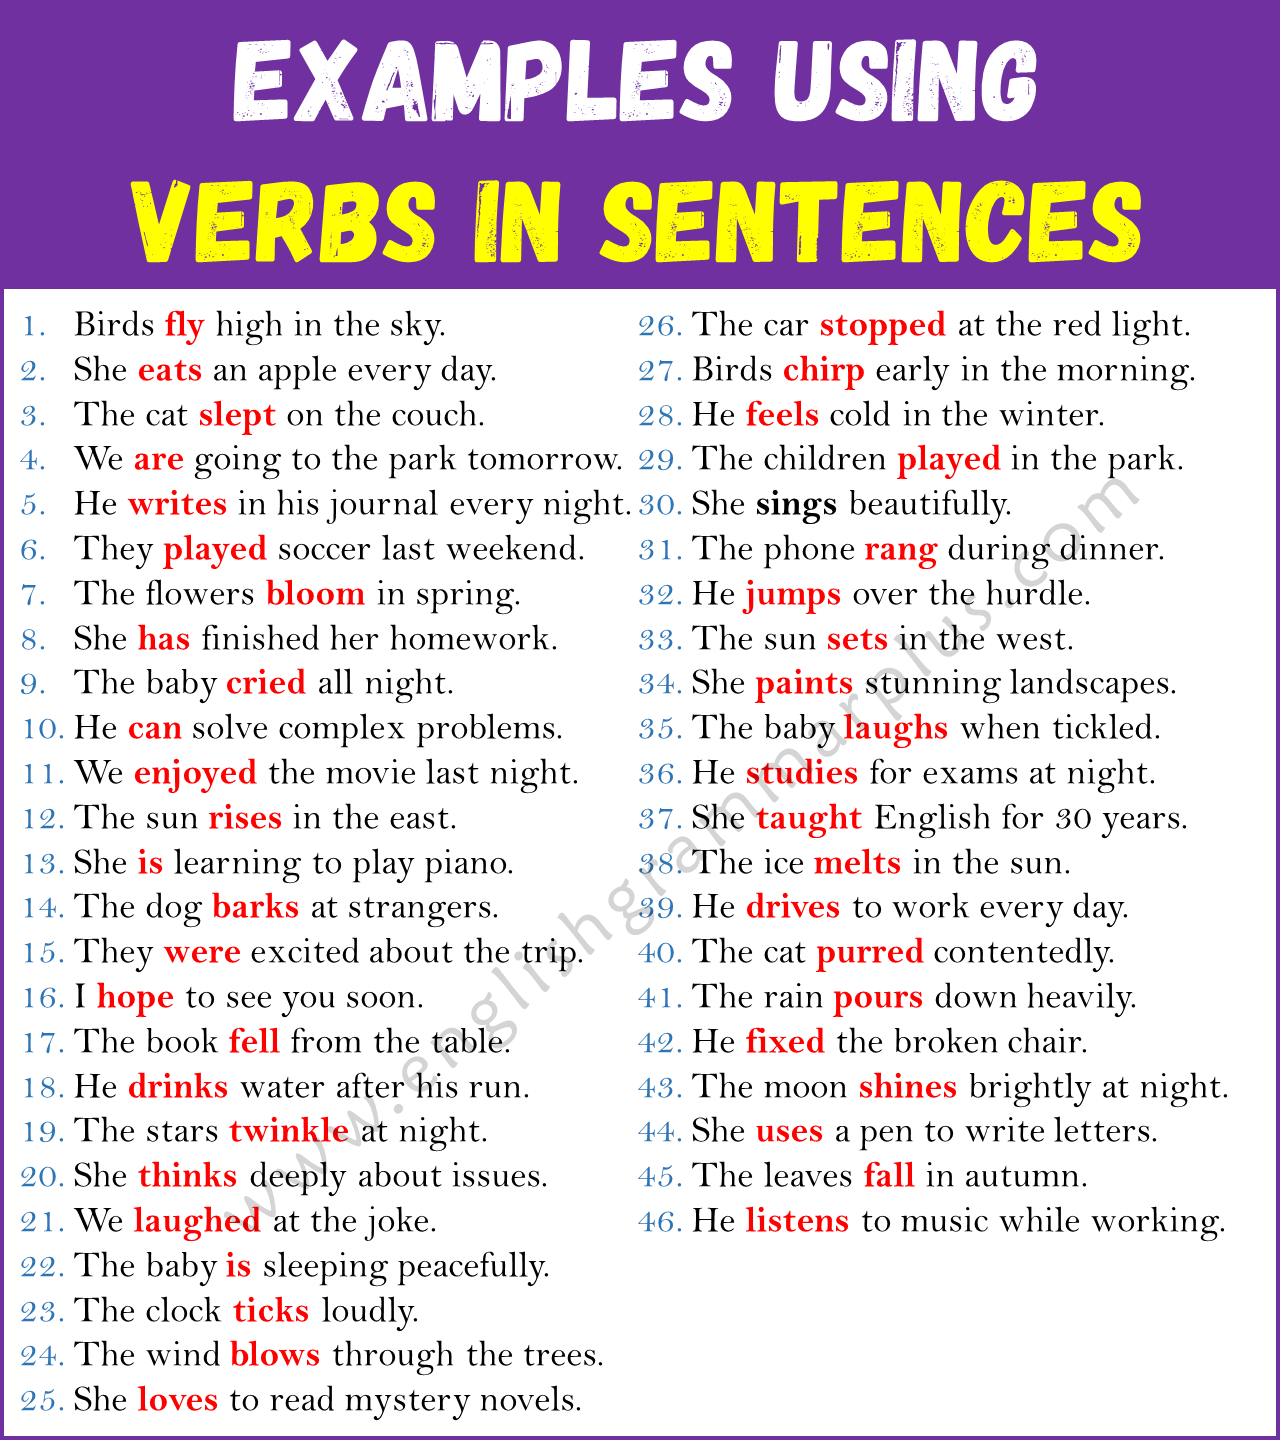 Examples of Verbs in Sentences